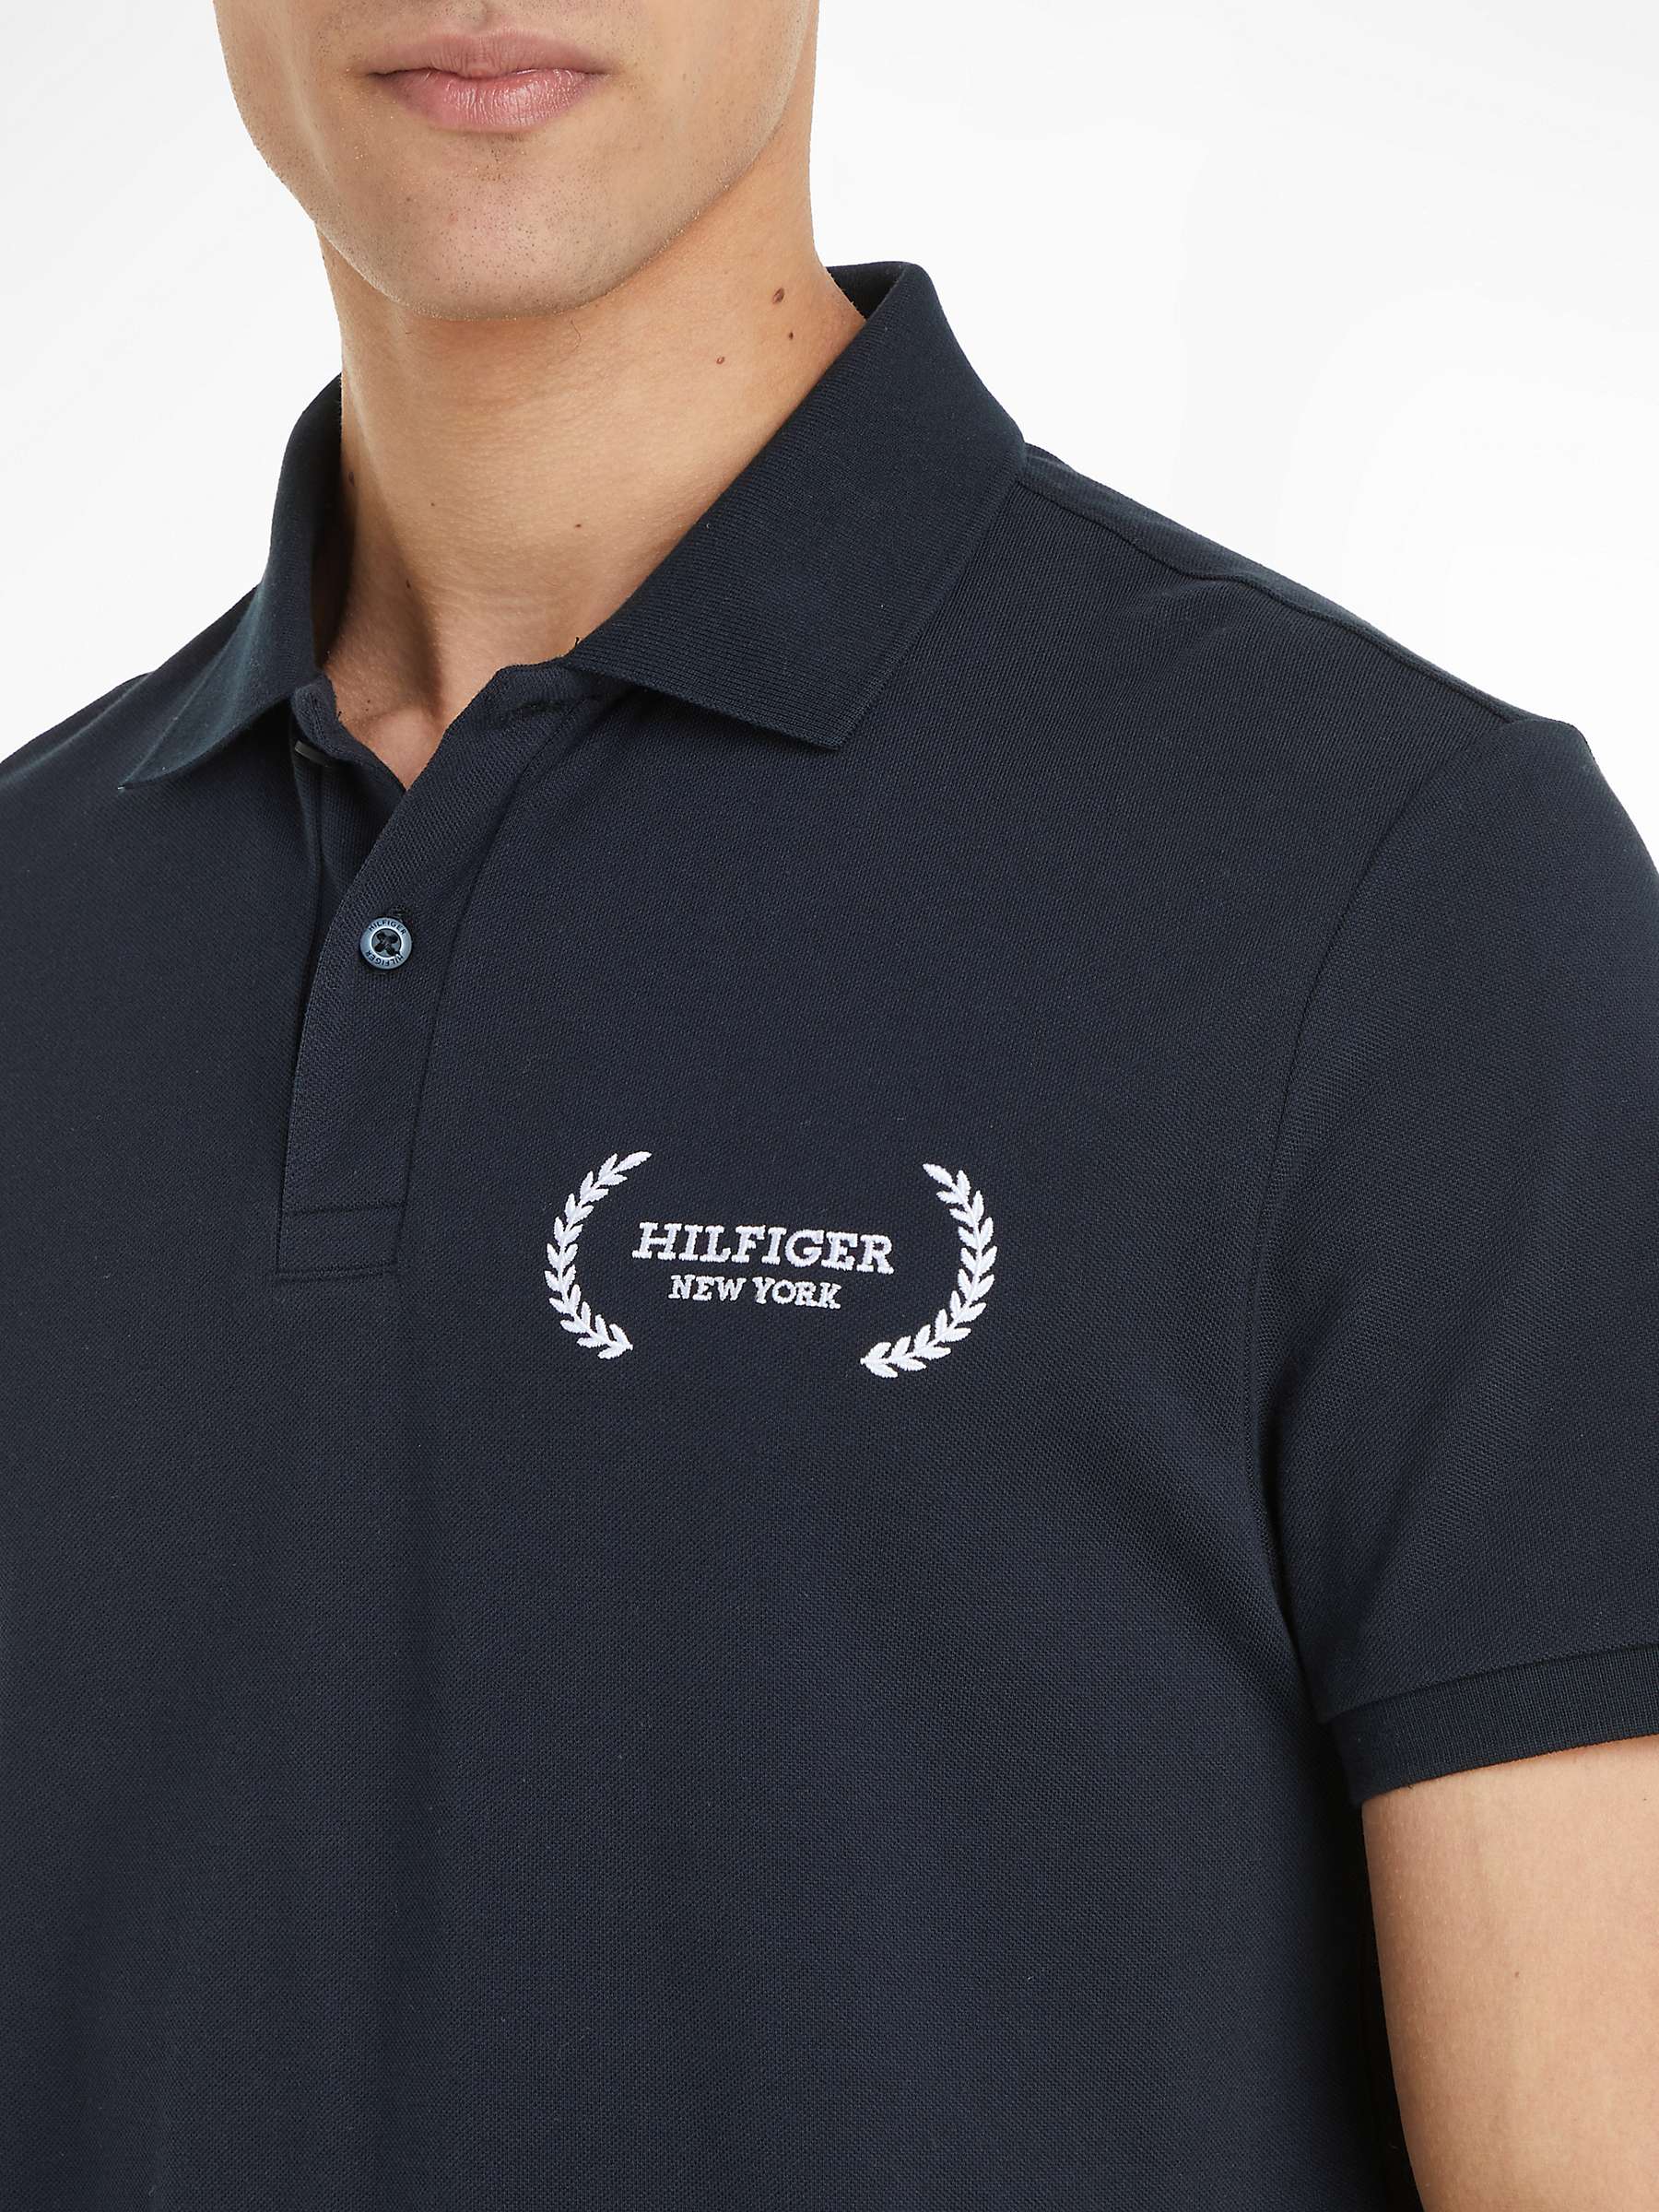 Buy Tommy Hilfiger Monotype Short Sleeve Polo Top, Desert Sky Online at johnlewis.com